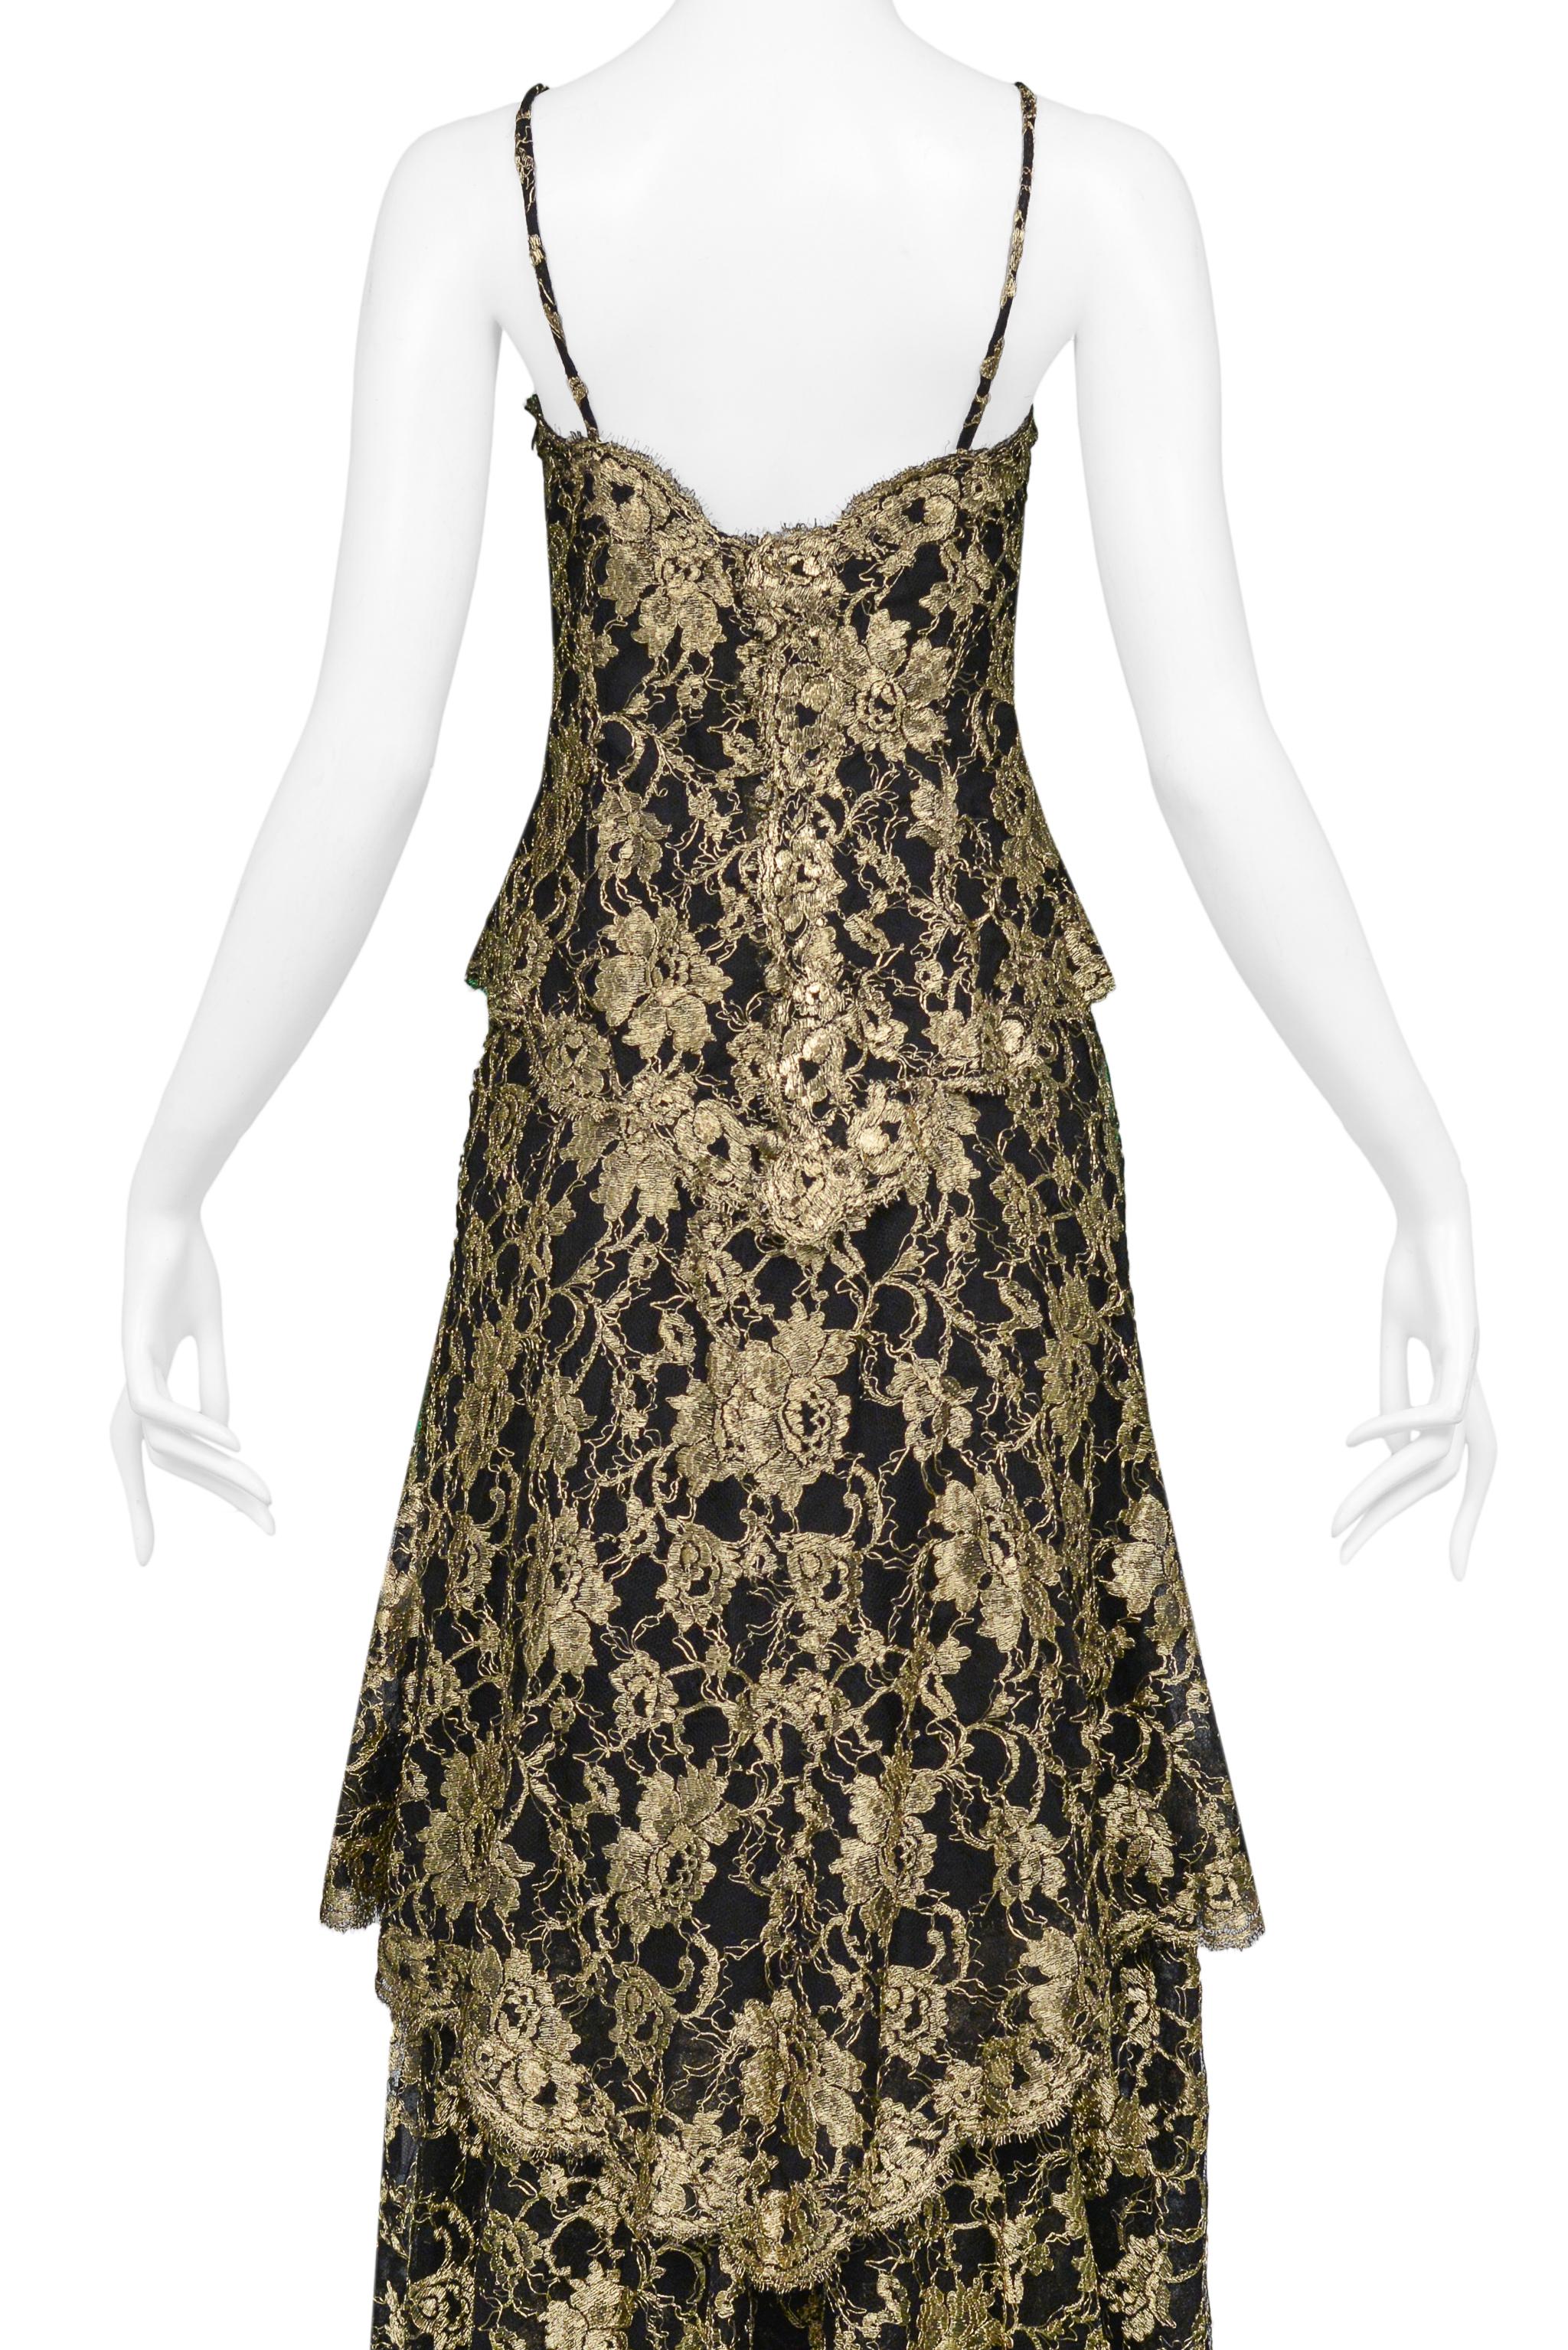 Chanel By Karl Lagerfeld Gold & Black Lace Evening Gown 1986 5